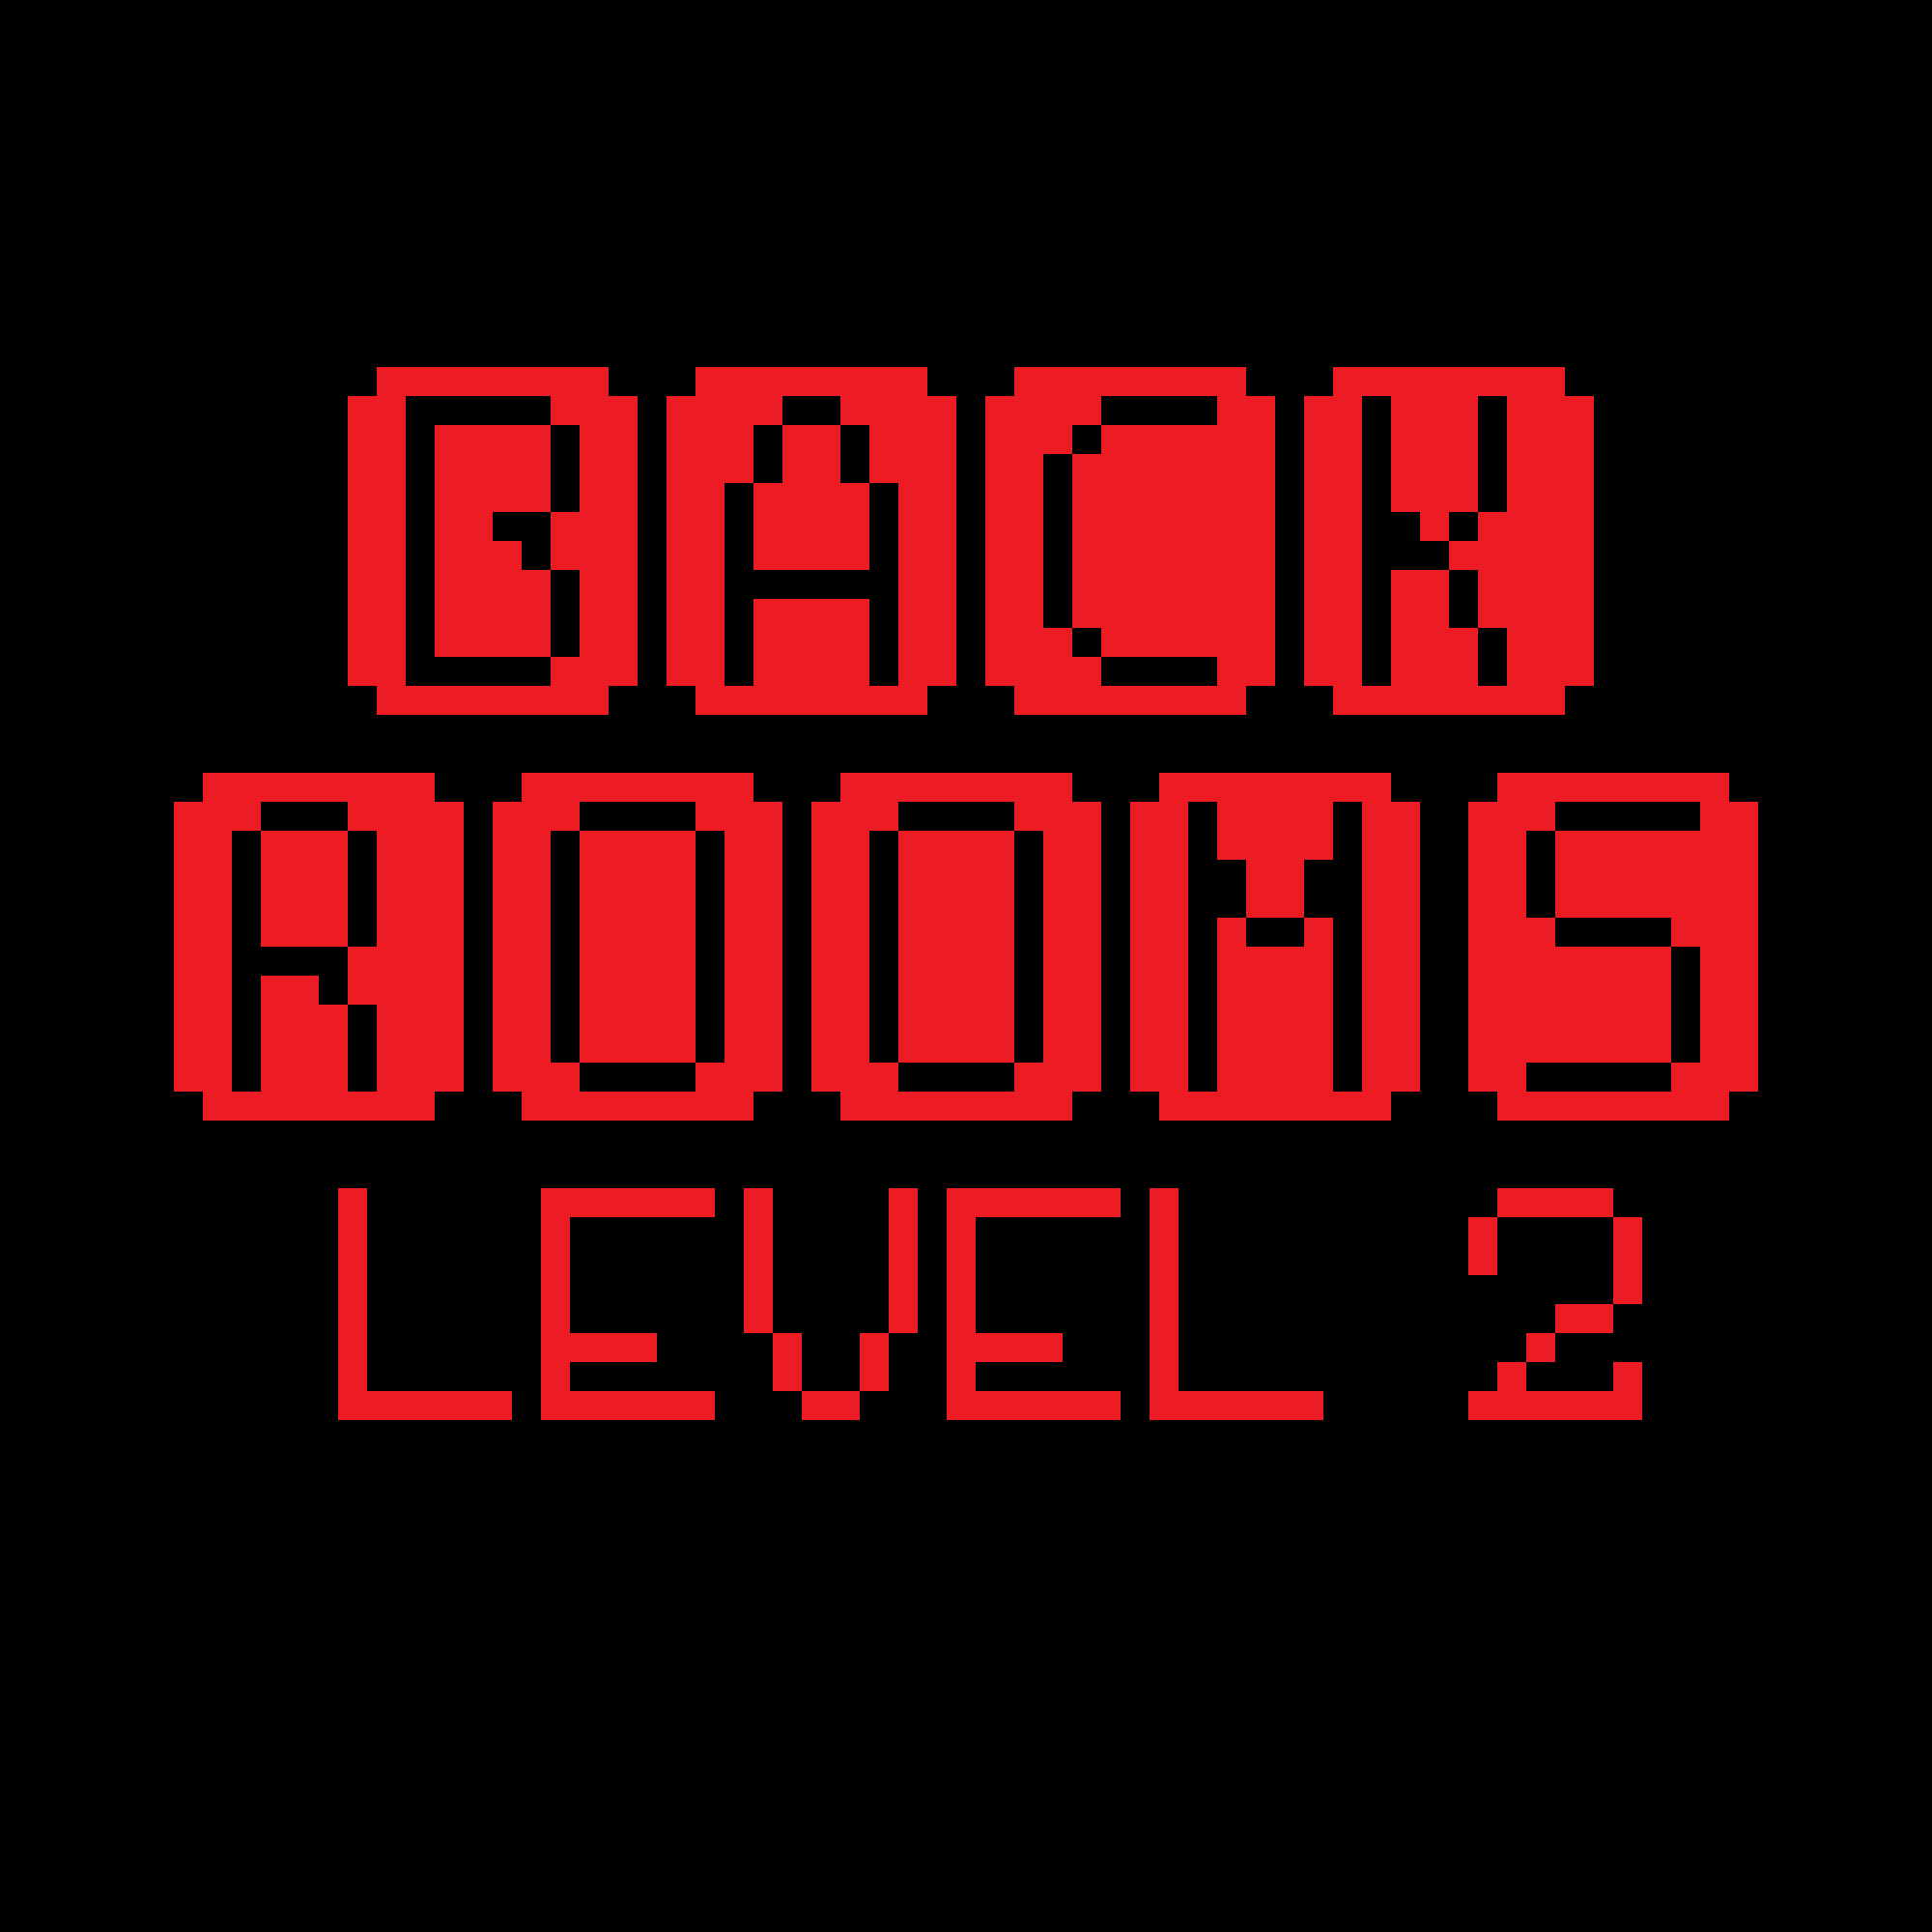 BackRooms Level 2 by GrapixLeGrand